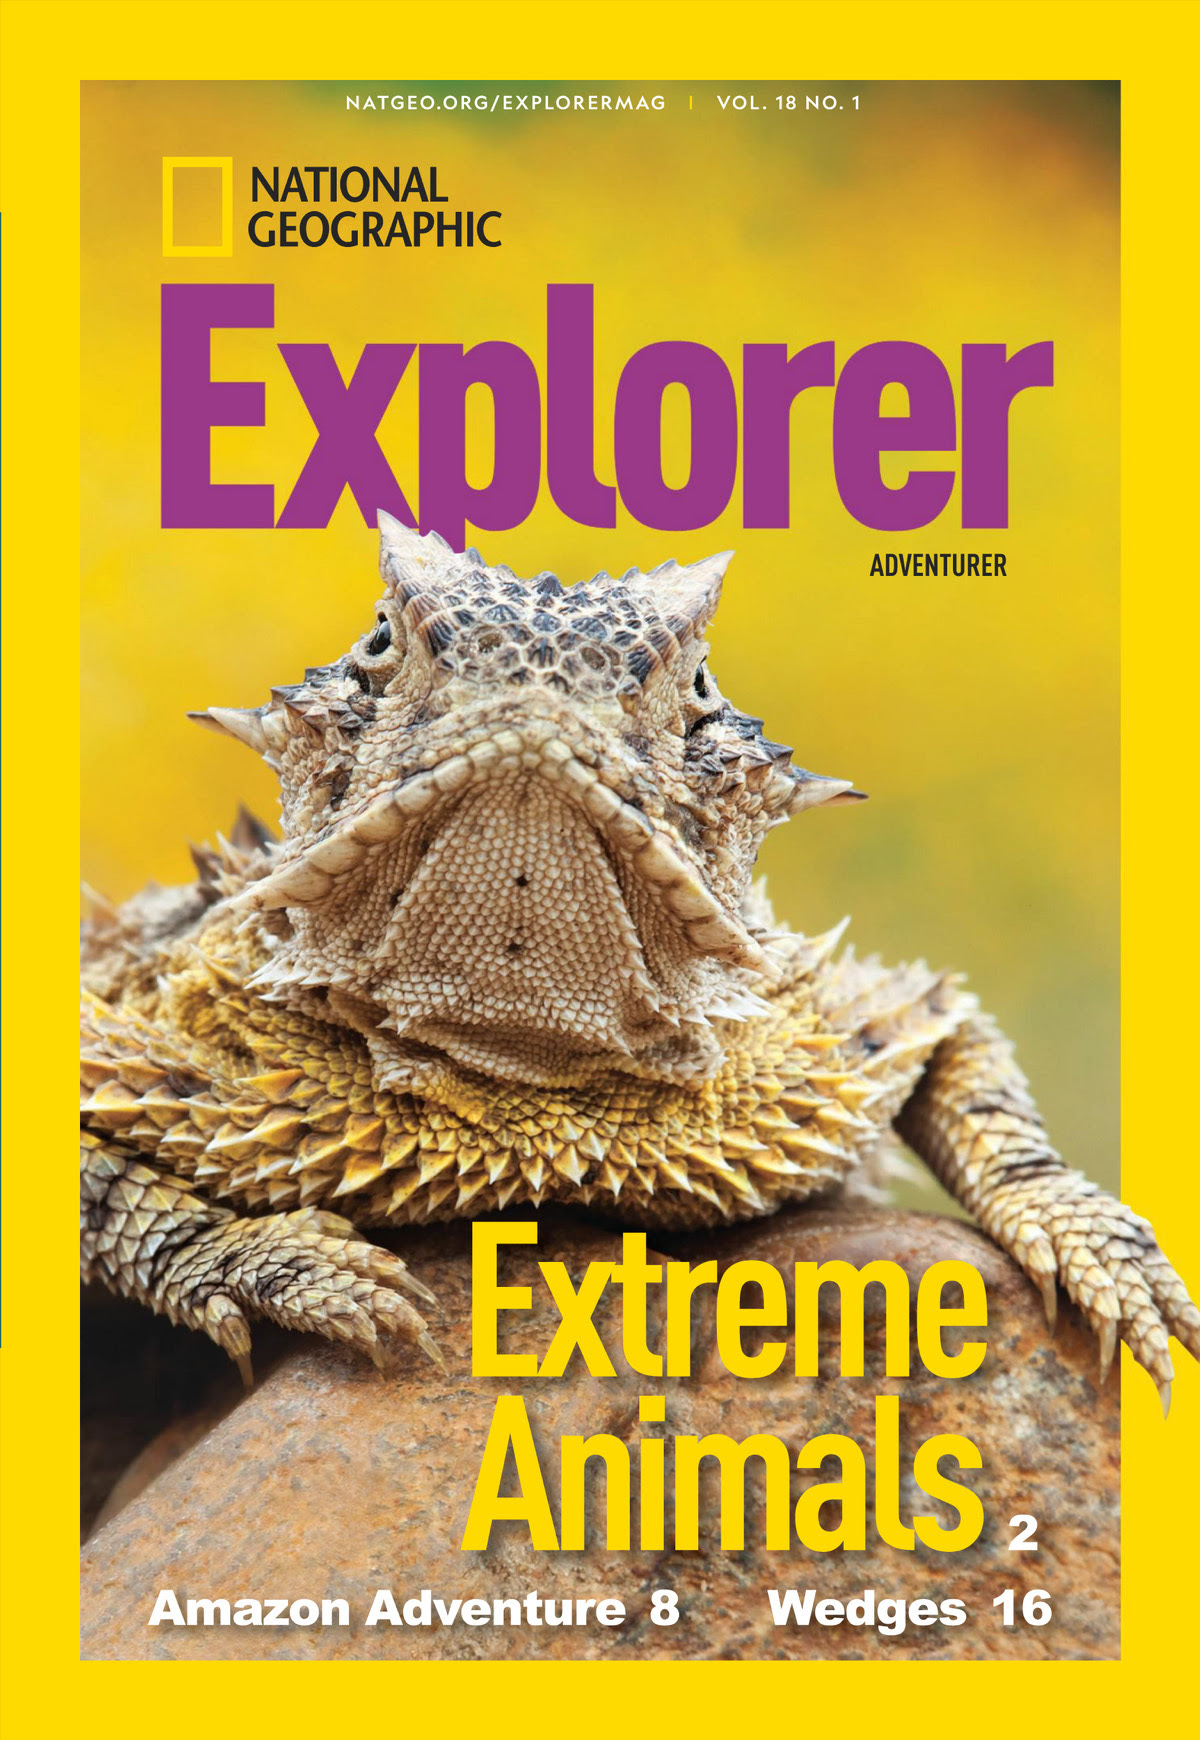 It depicts an expedition to the amazon river to capture animals for their father's wildlife collection business. Adventurer September 2018